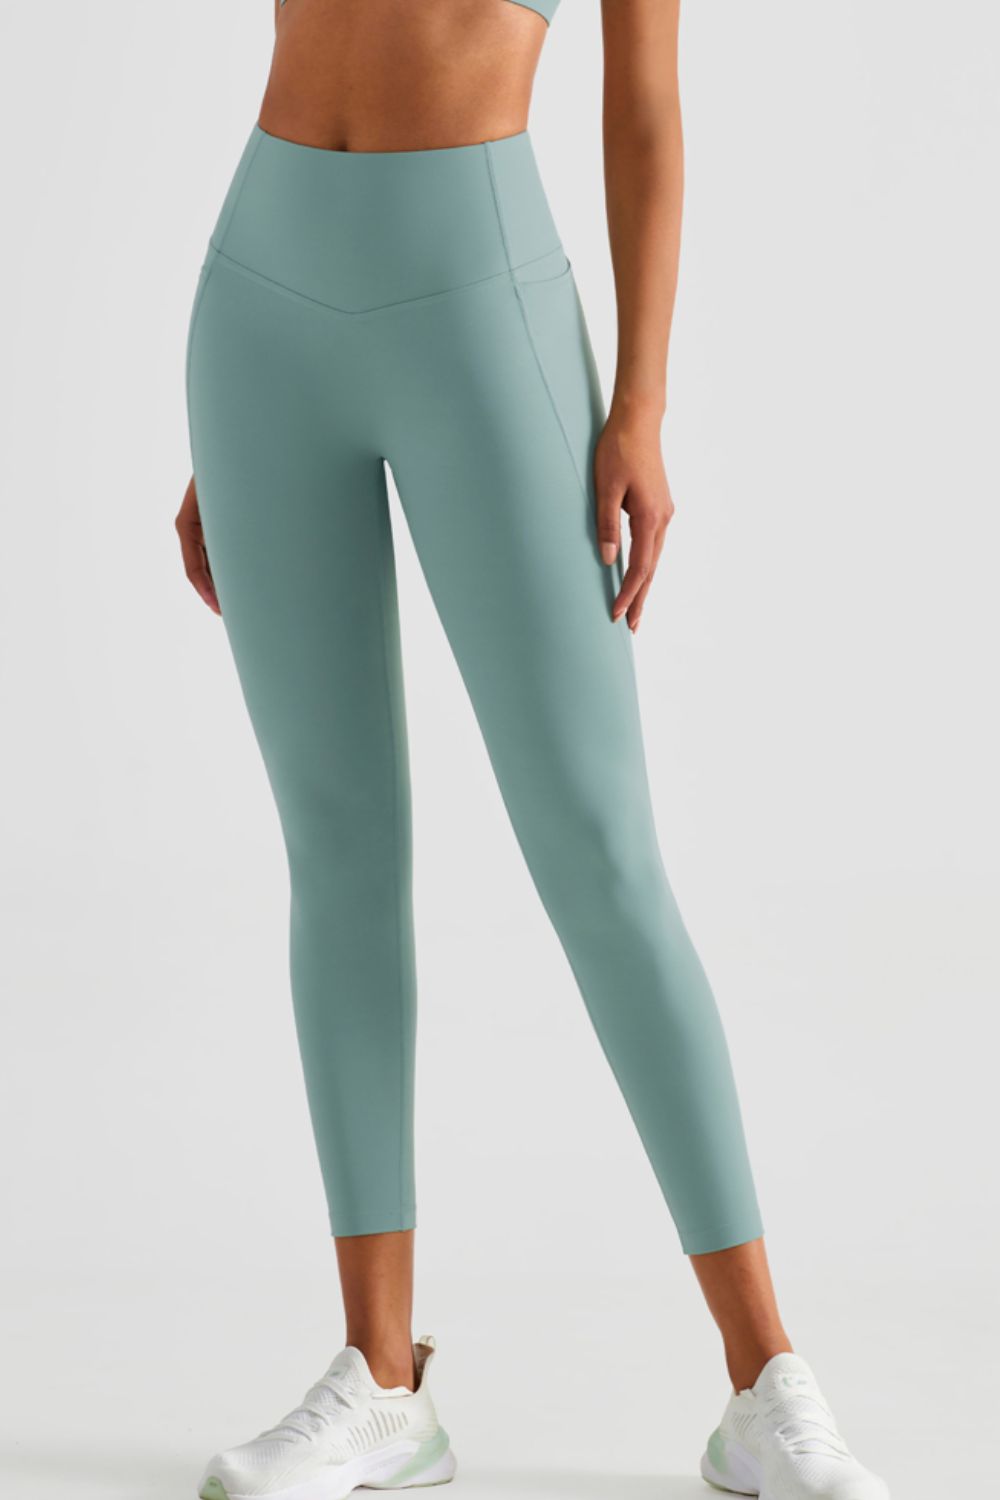 Wide Waistband Sports Leggings with Pockets - Guy Christopher 